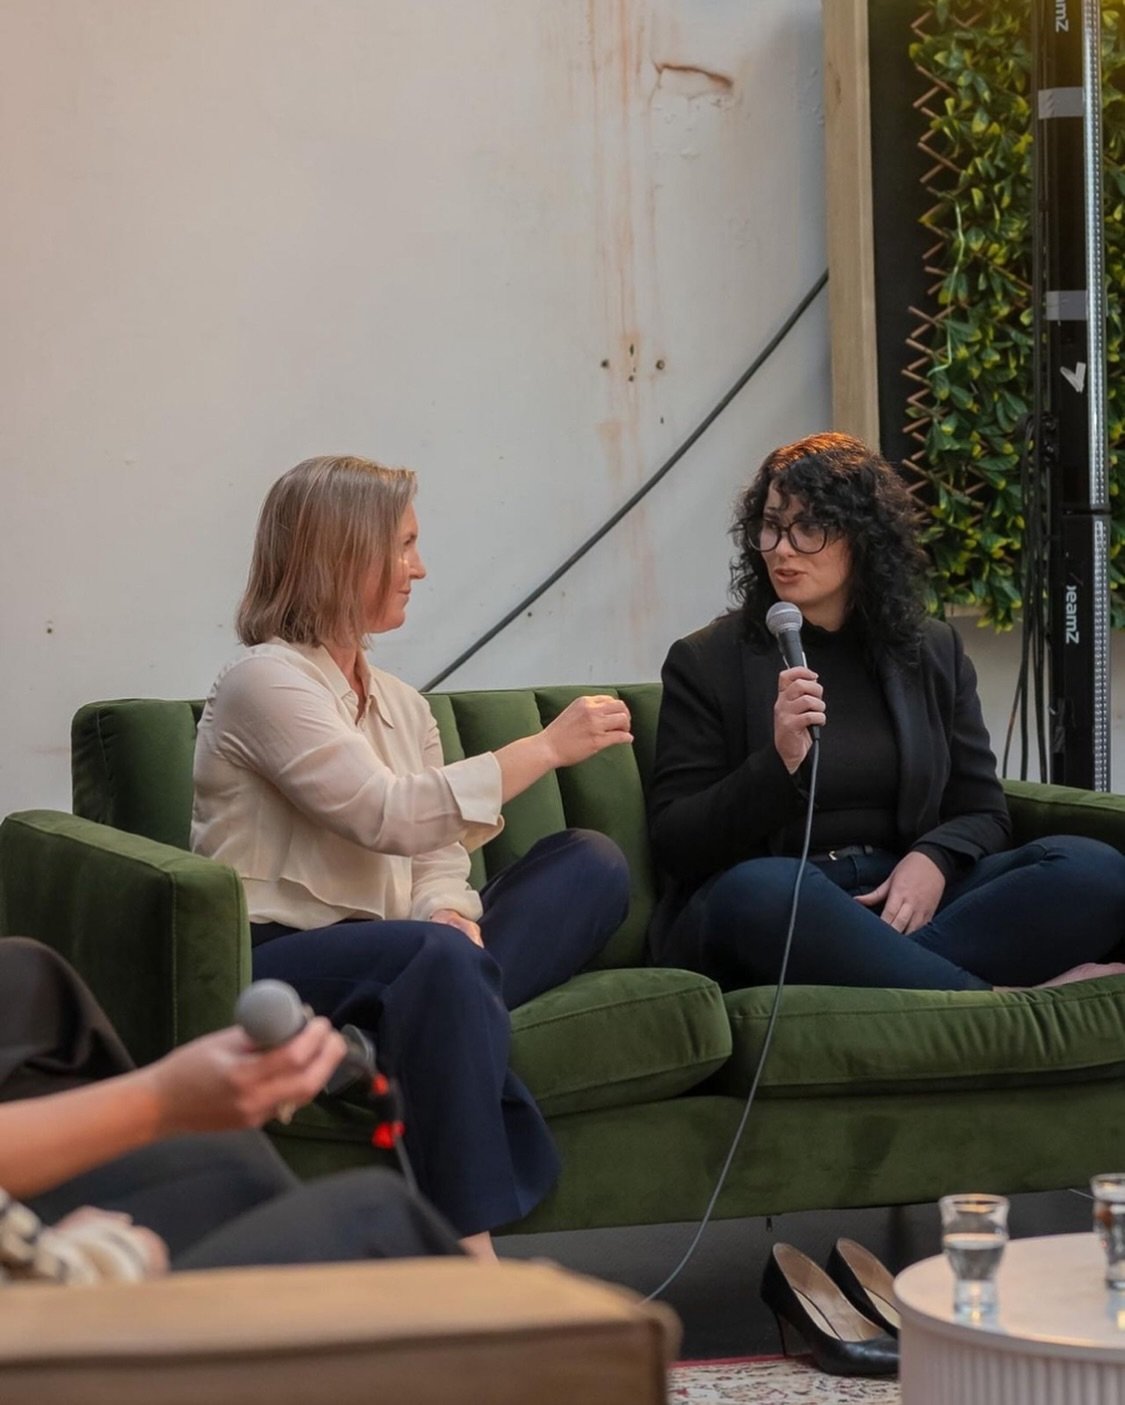 Opening up about mental health and startups isn&rsquo;t always easy, but it&rsquo;s necessary if we want to tackle the taboo nature of it all.

Elle had the privilege to share her journey as a neurodivergent entrepreneur and a women in business at @e